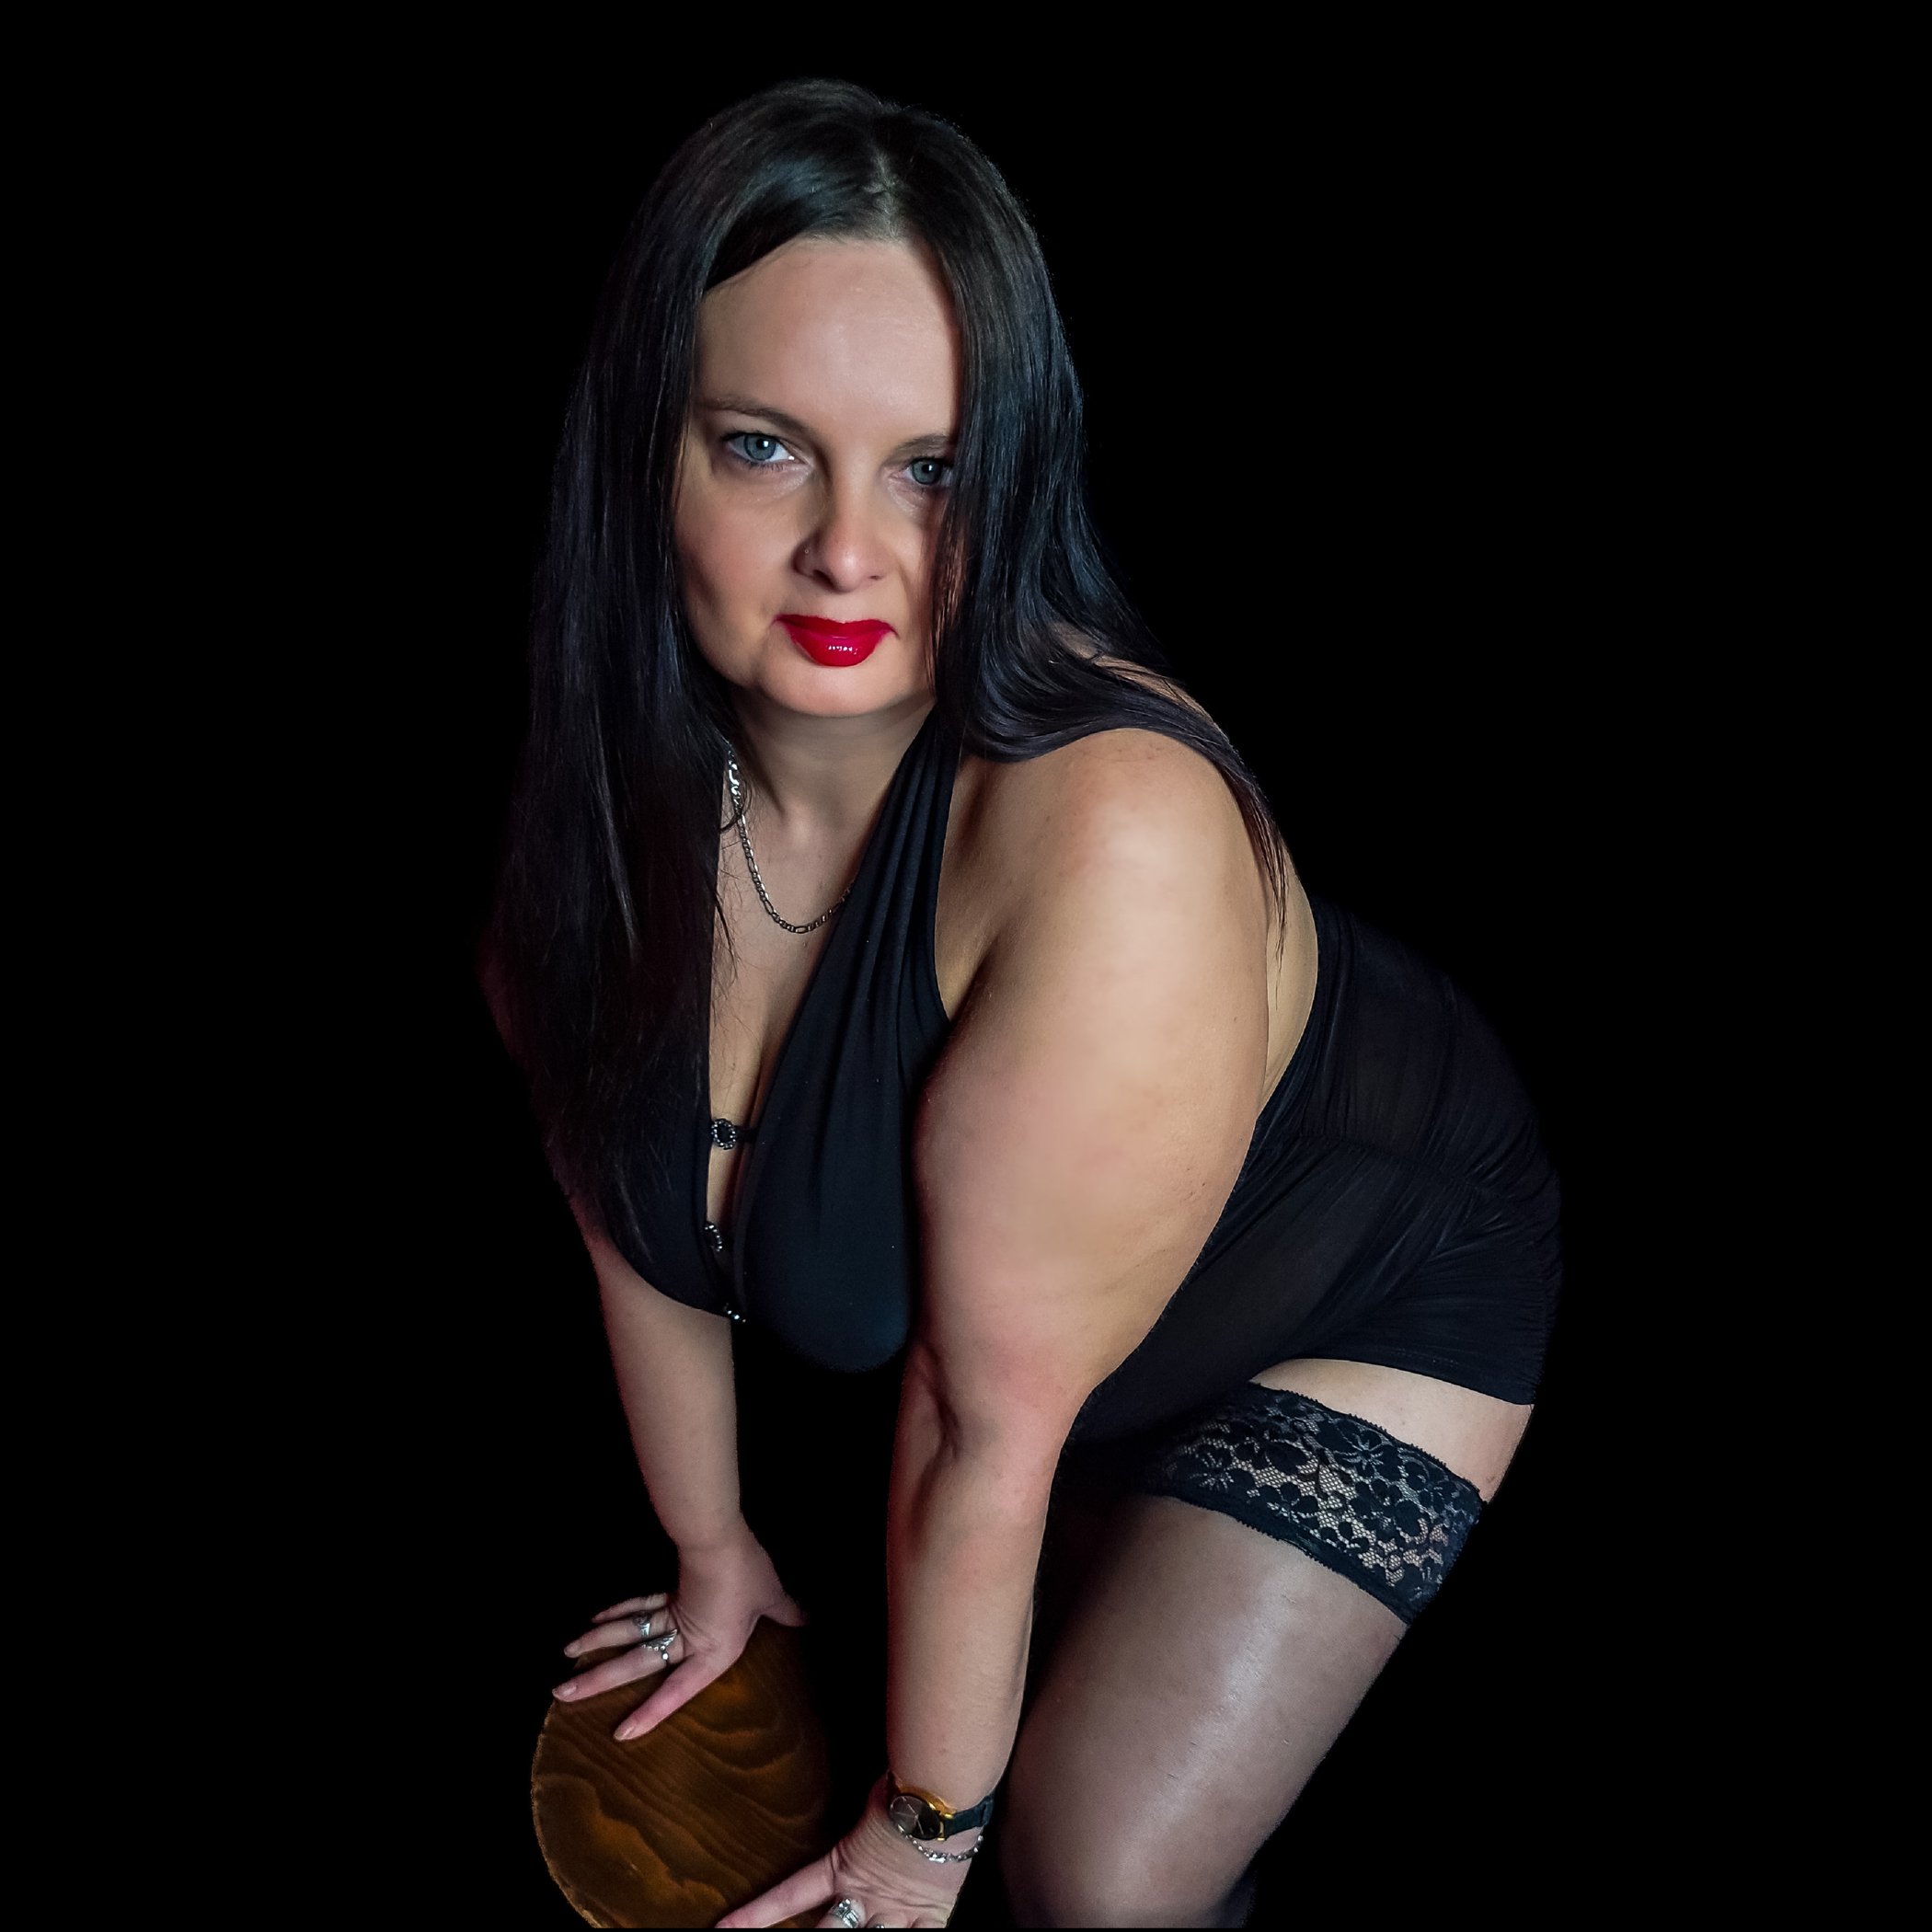 Find Escort Service in Erftstadt and Enjoy Time With Pretty Girls - model photo Vollweib Tania